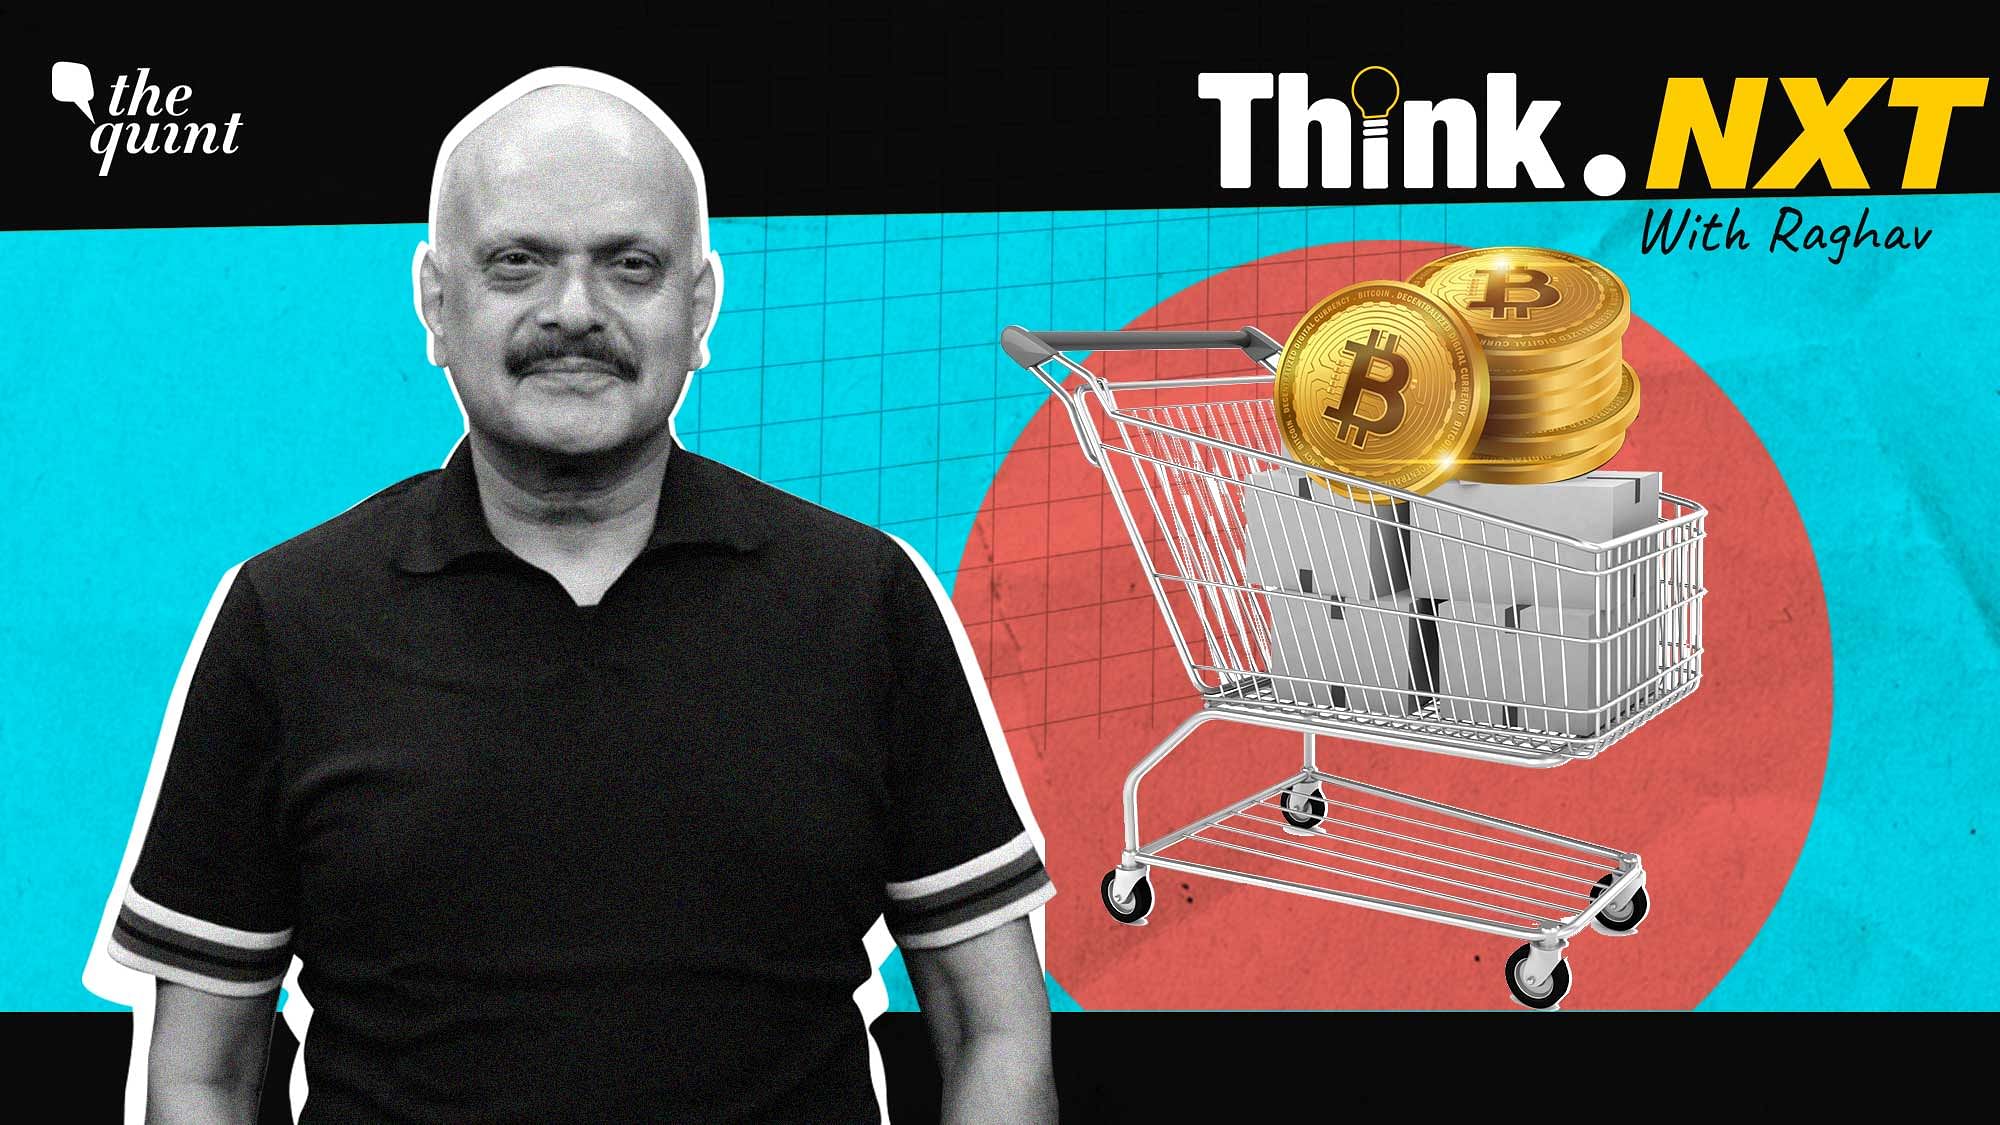 <div class="paragraphs"><p>Watch the first episode of the 'Think.Nxt With Raghav' series, where experts discuss the very nature of cryptocurrency and if it can replace currency or money as a medium of exchange.</p></div>